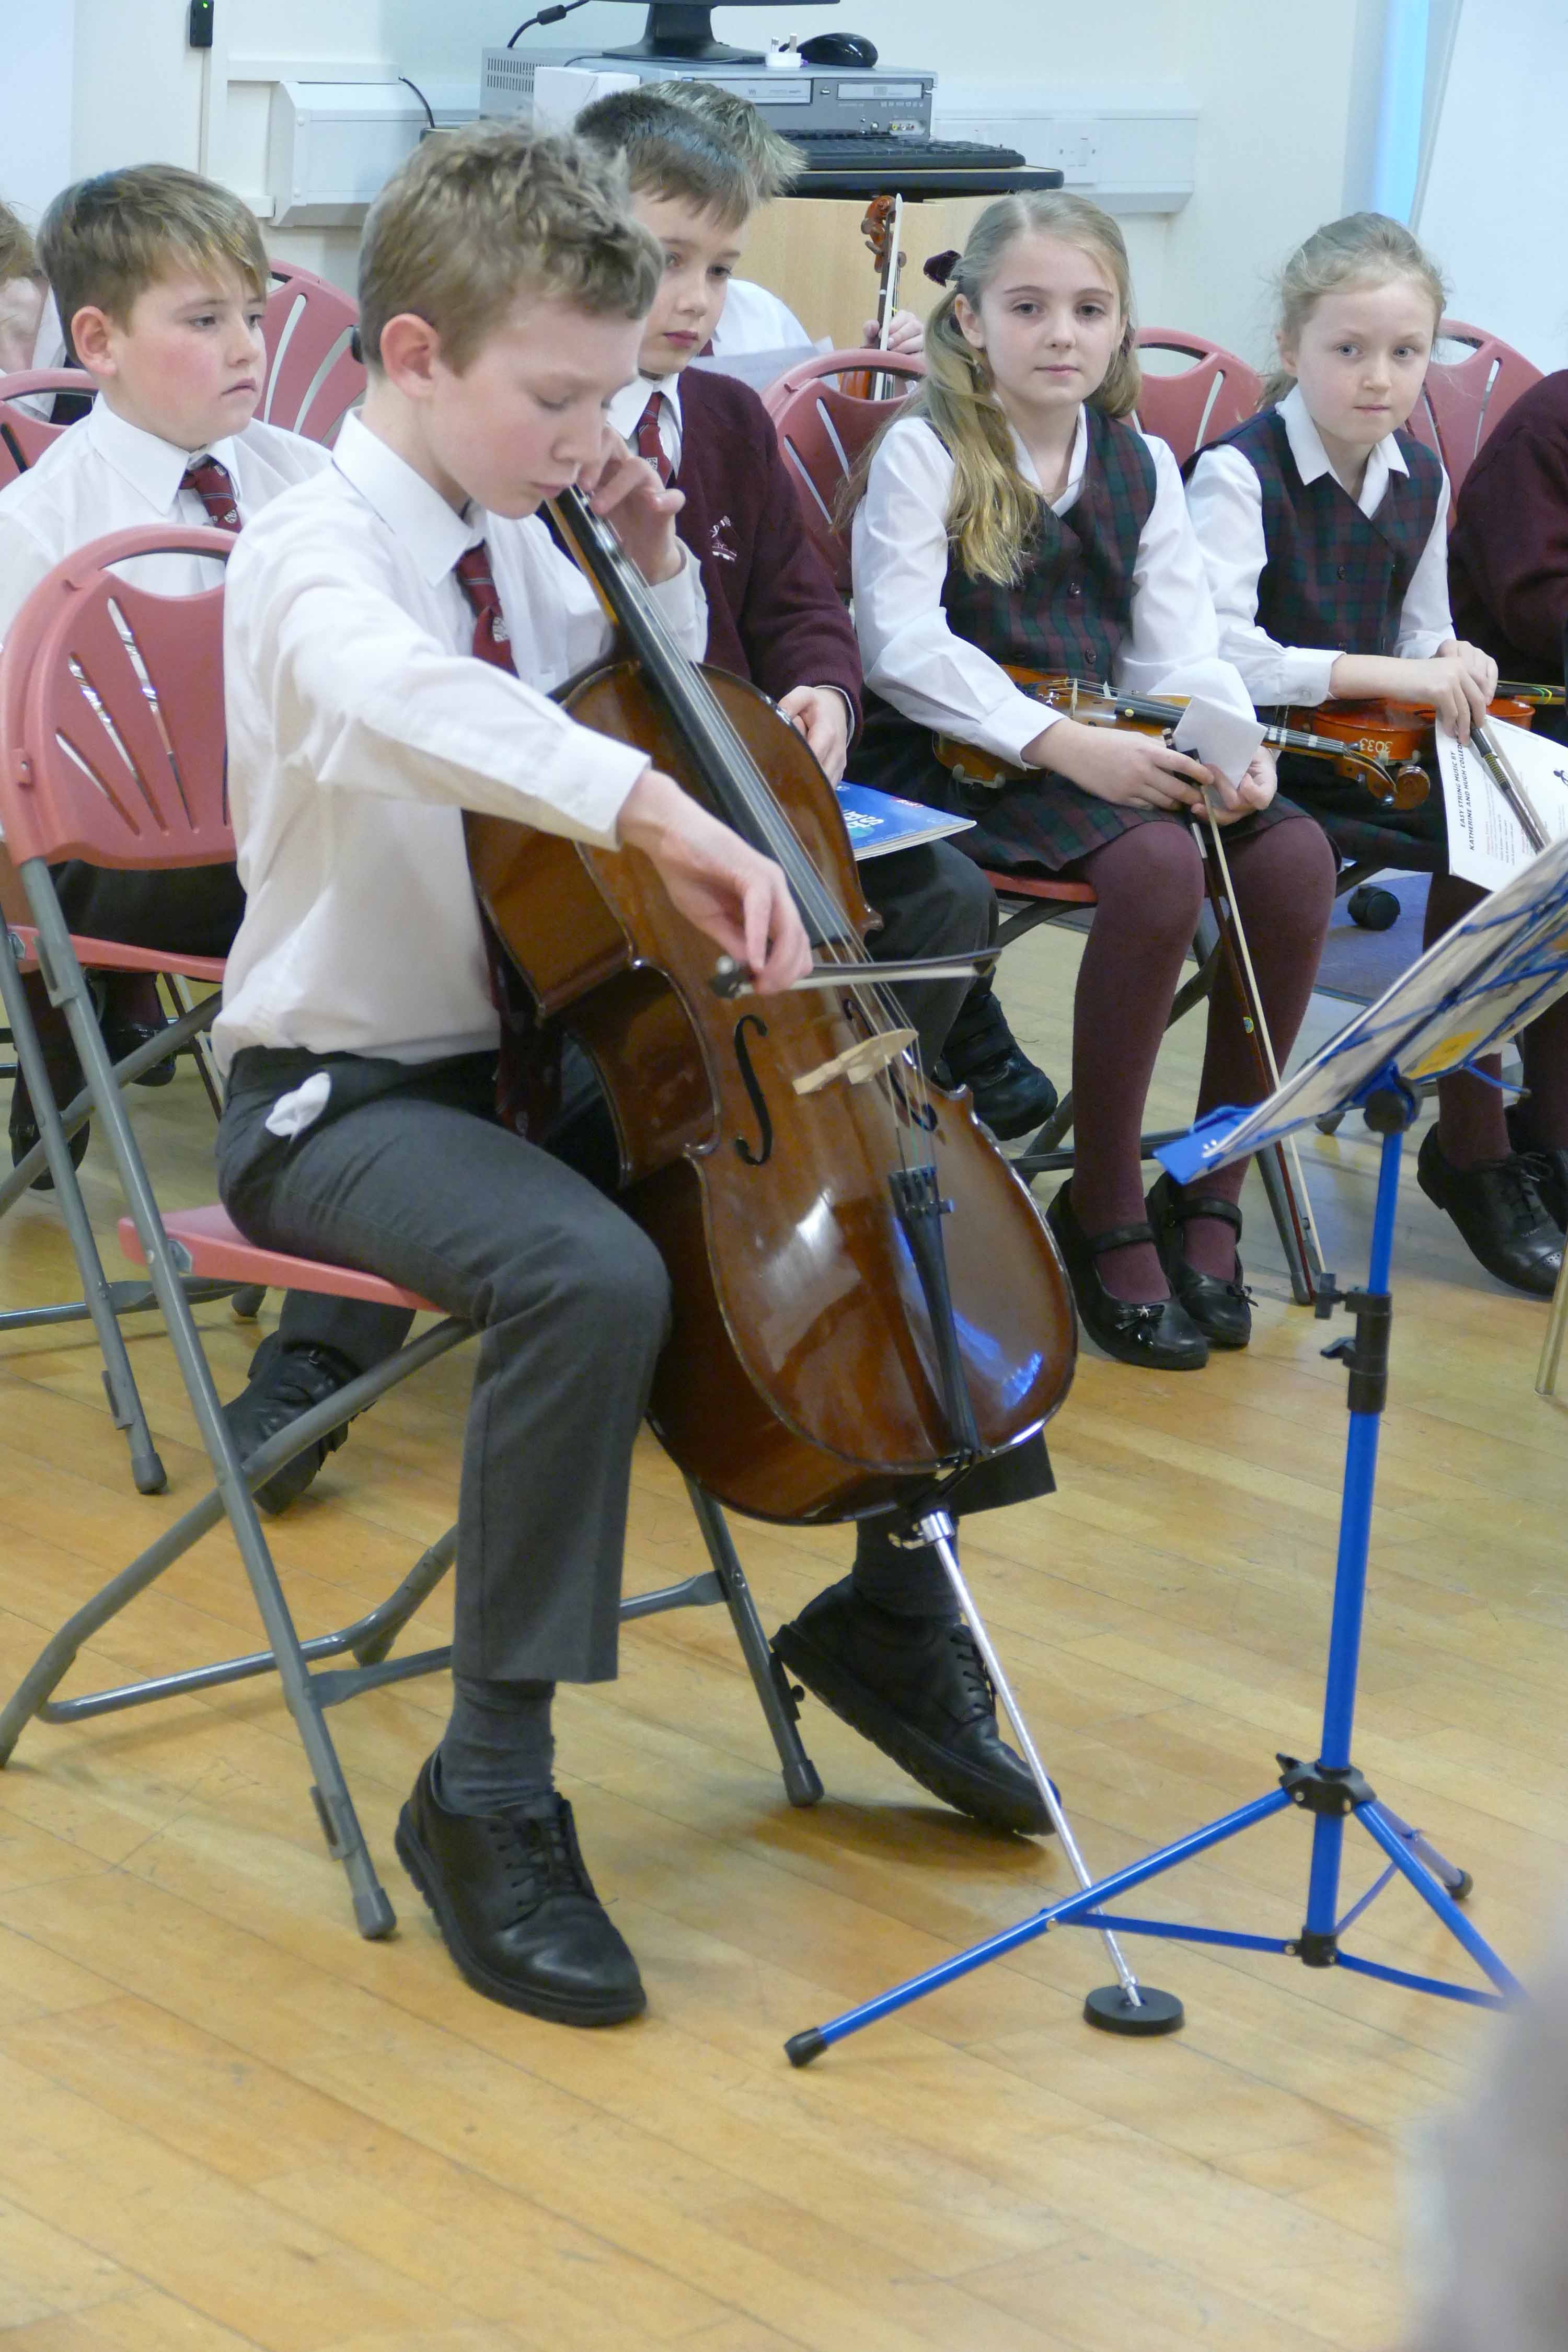 Musical Moments at the Prep School (5th Feb 2018)